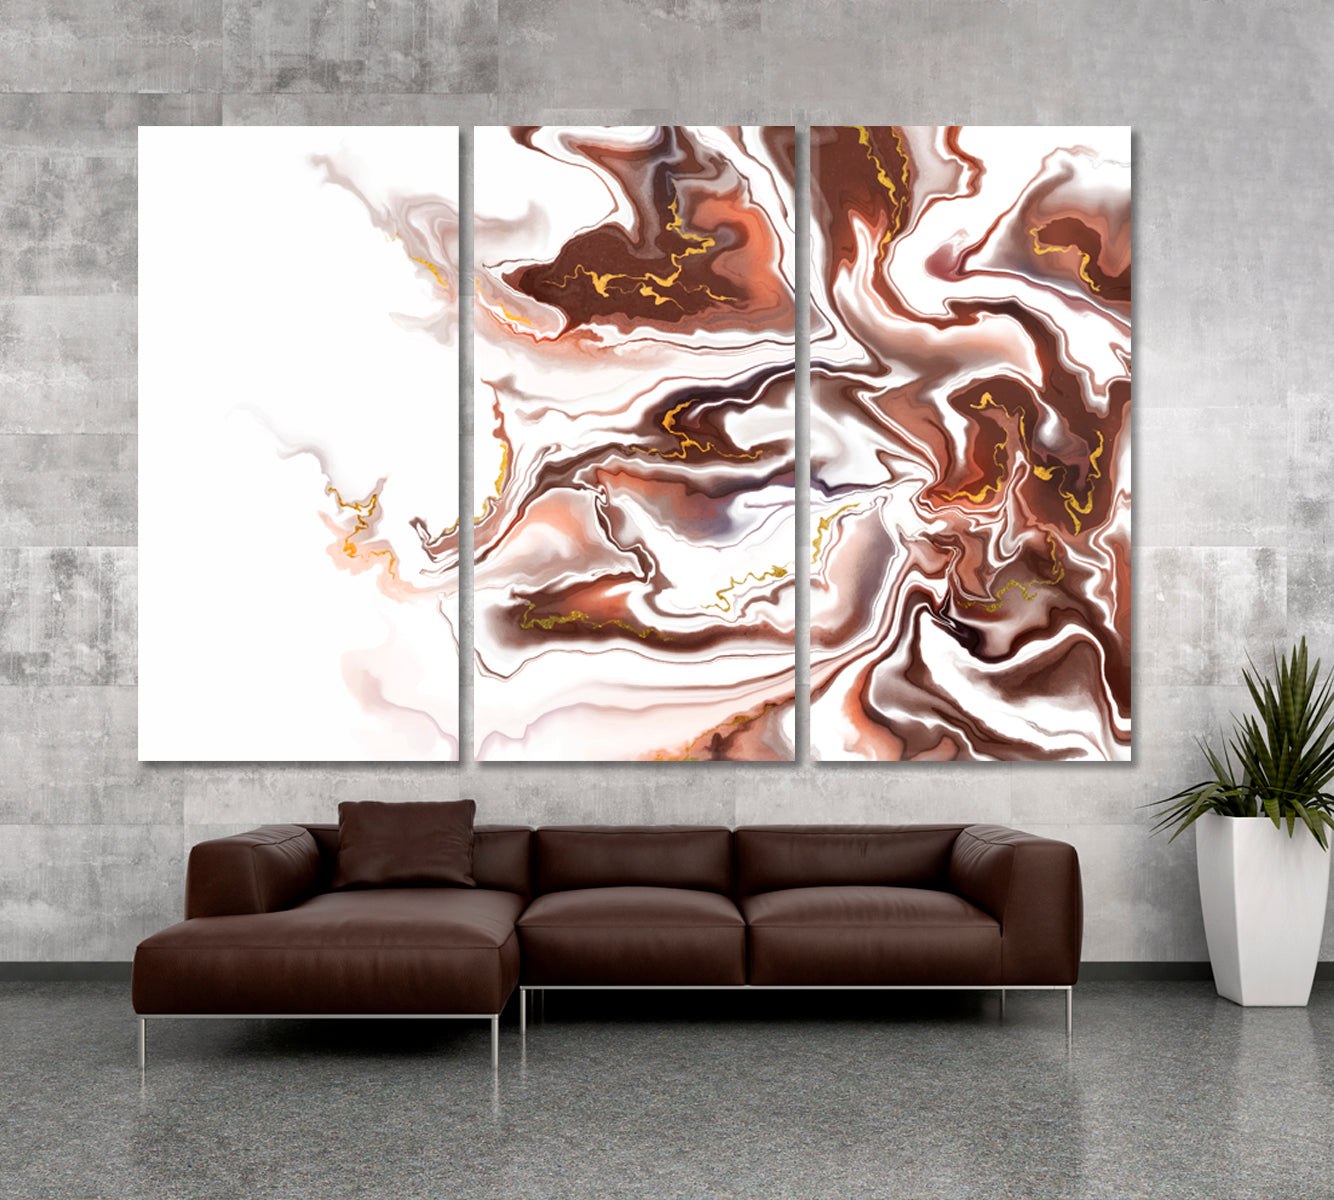 Brown Abstract Wavy Forms Futuristic Pattern Fluid Art, Oriental Marbling Canvas Print Artesty 3 panels 36" x 24" 